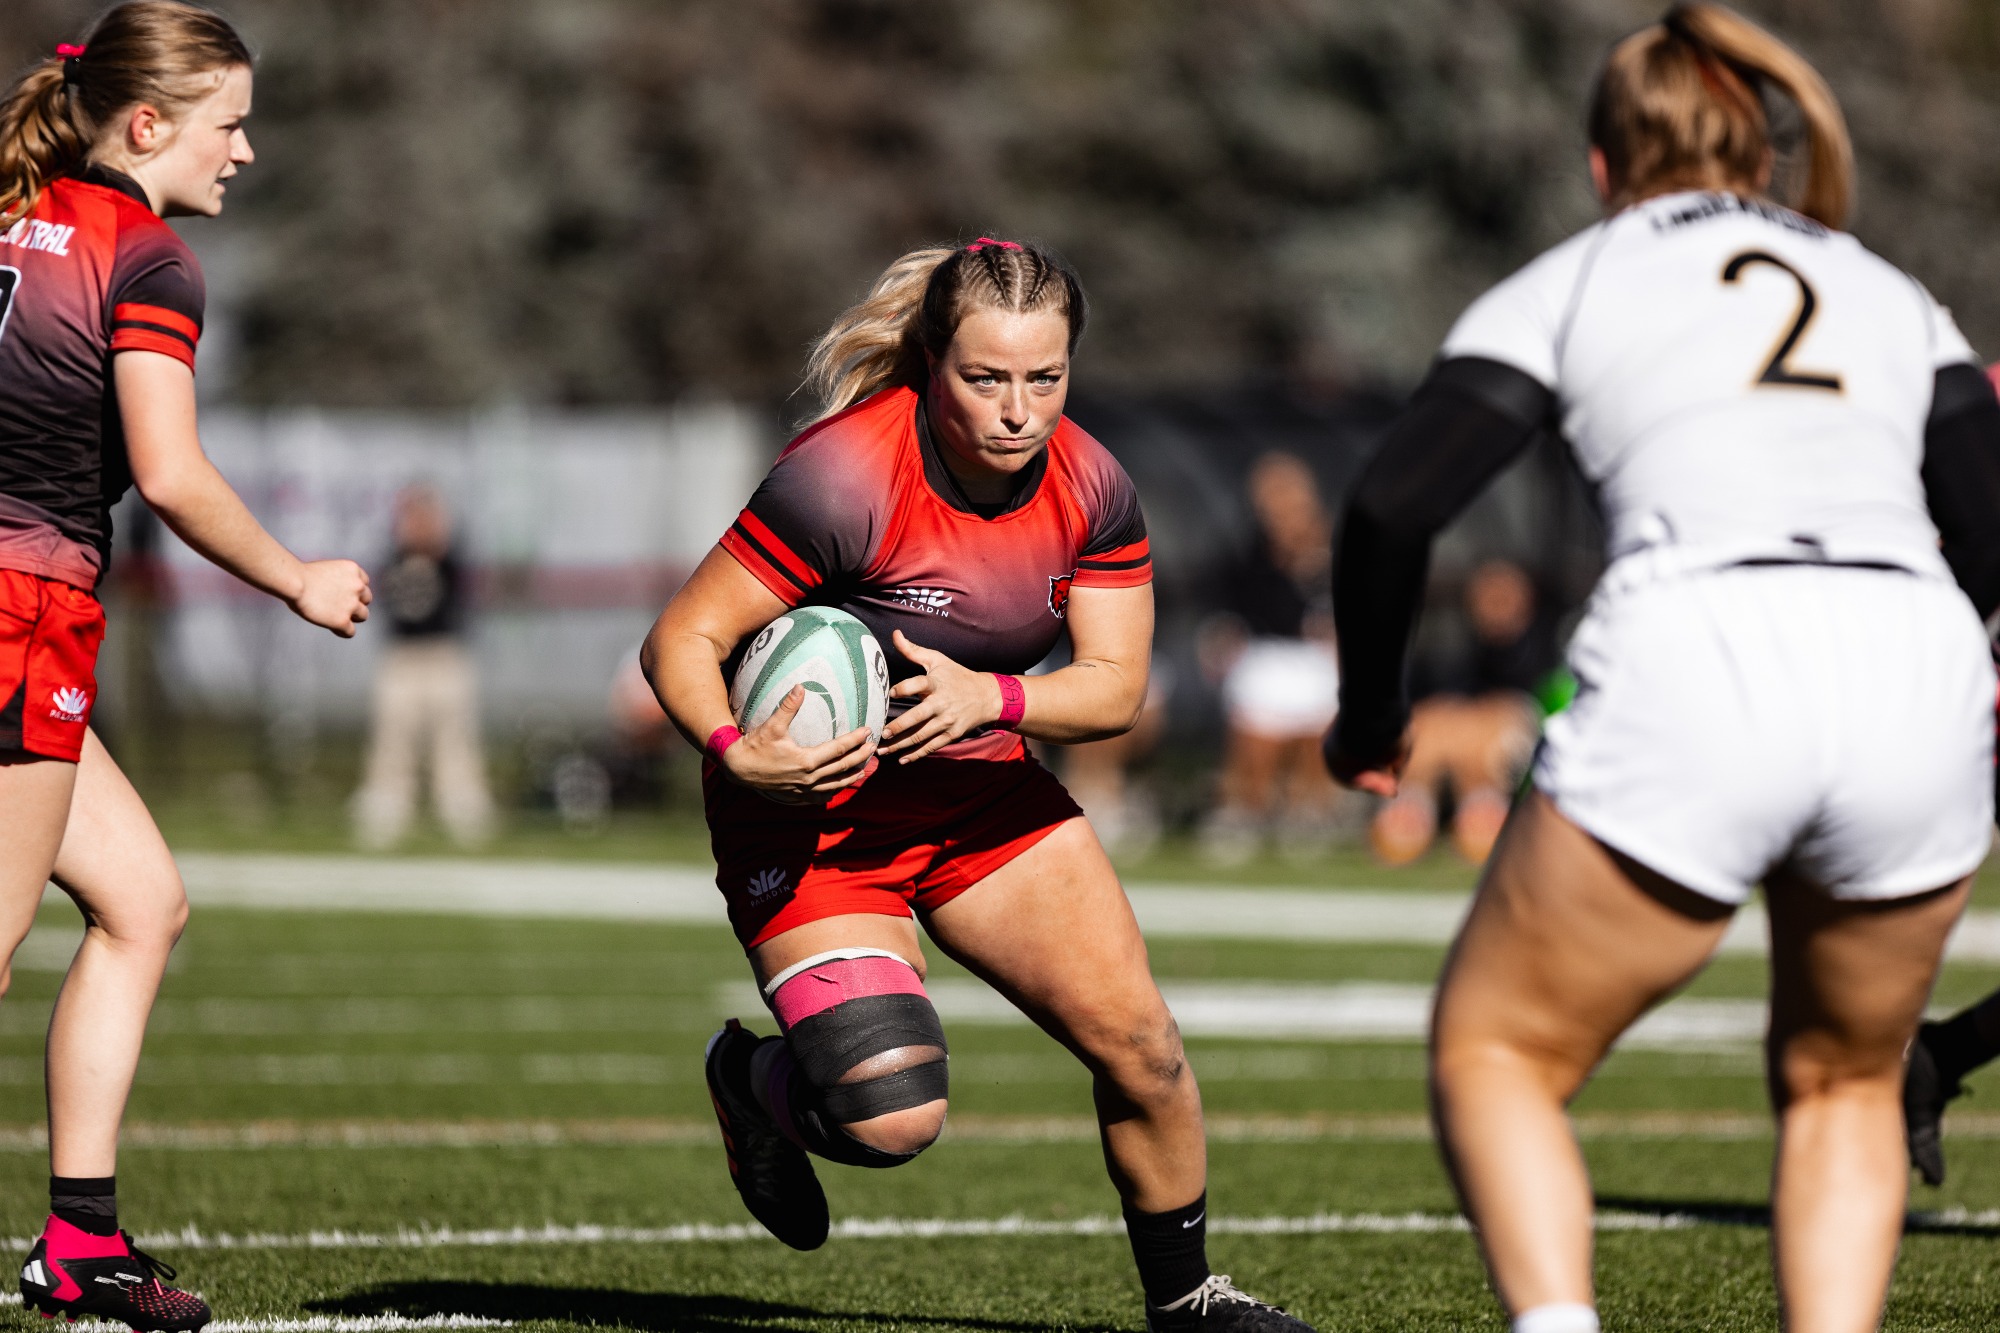 CWU Women's Rugby